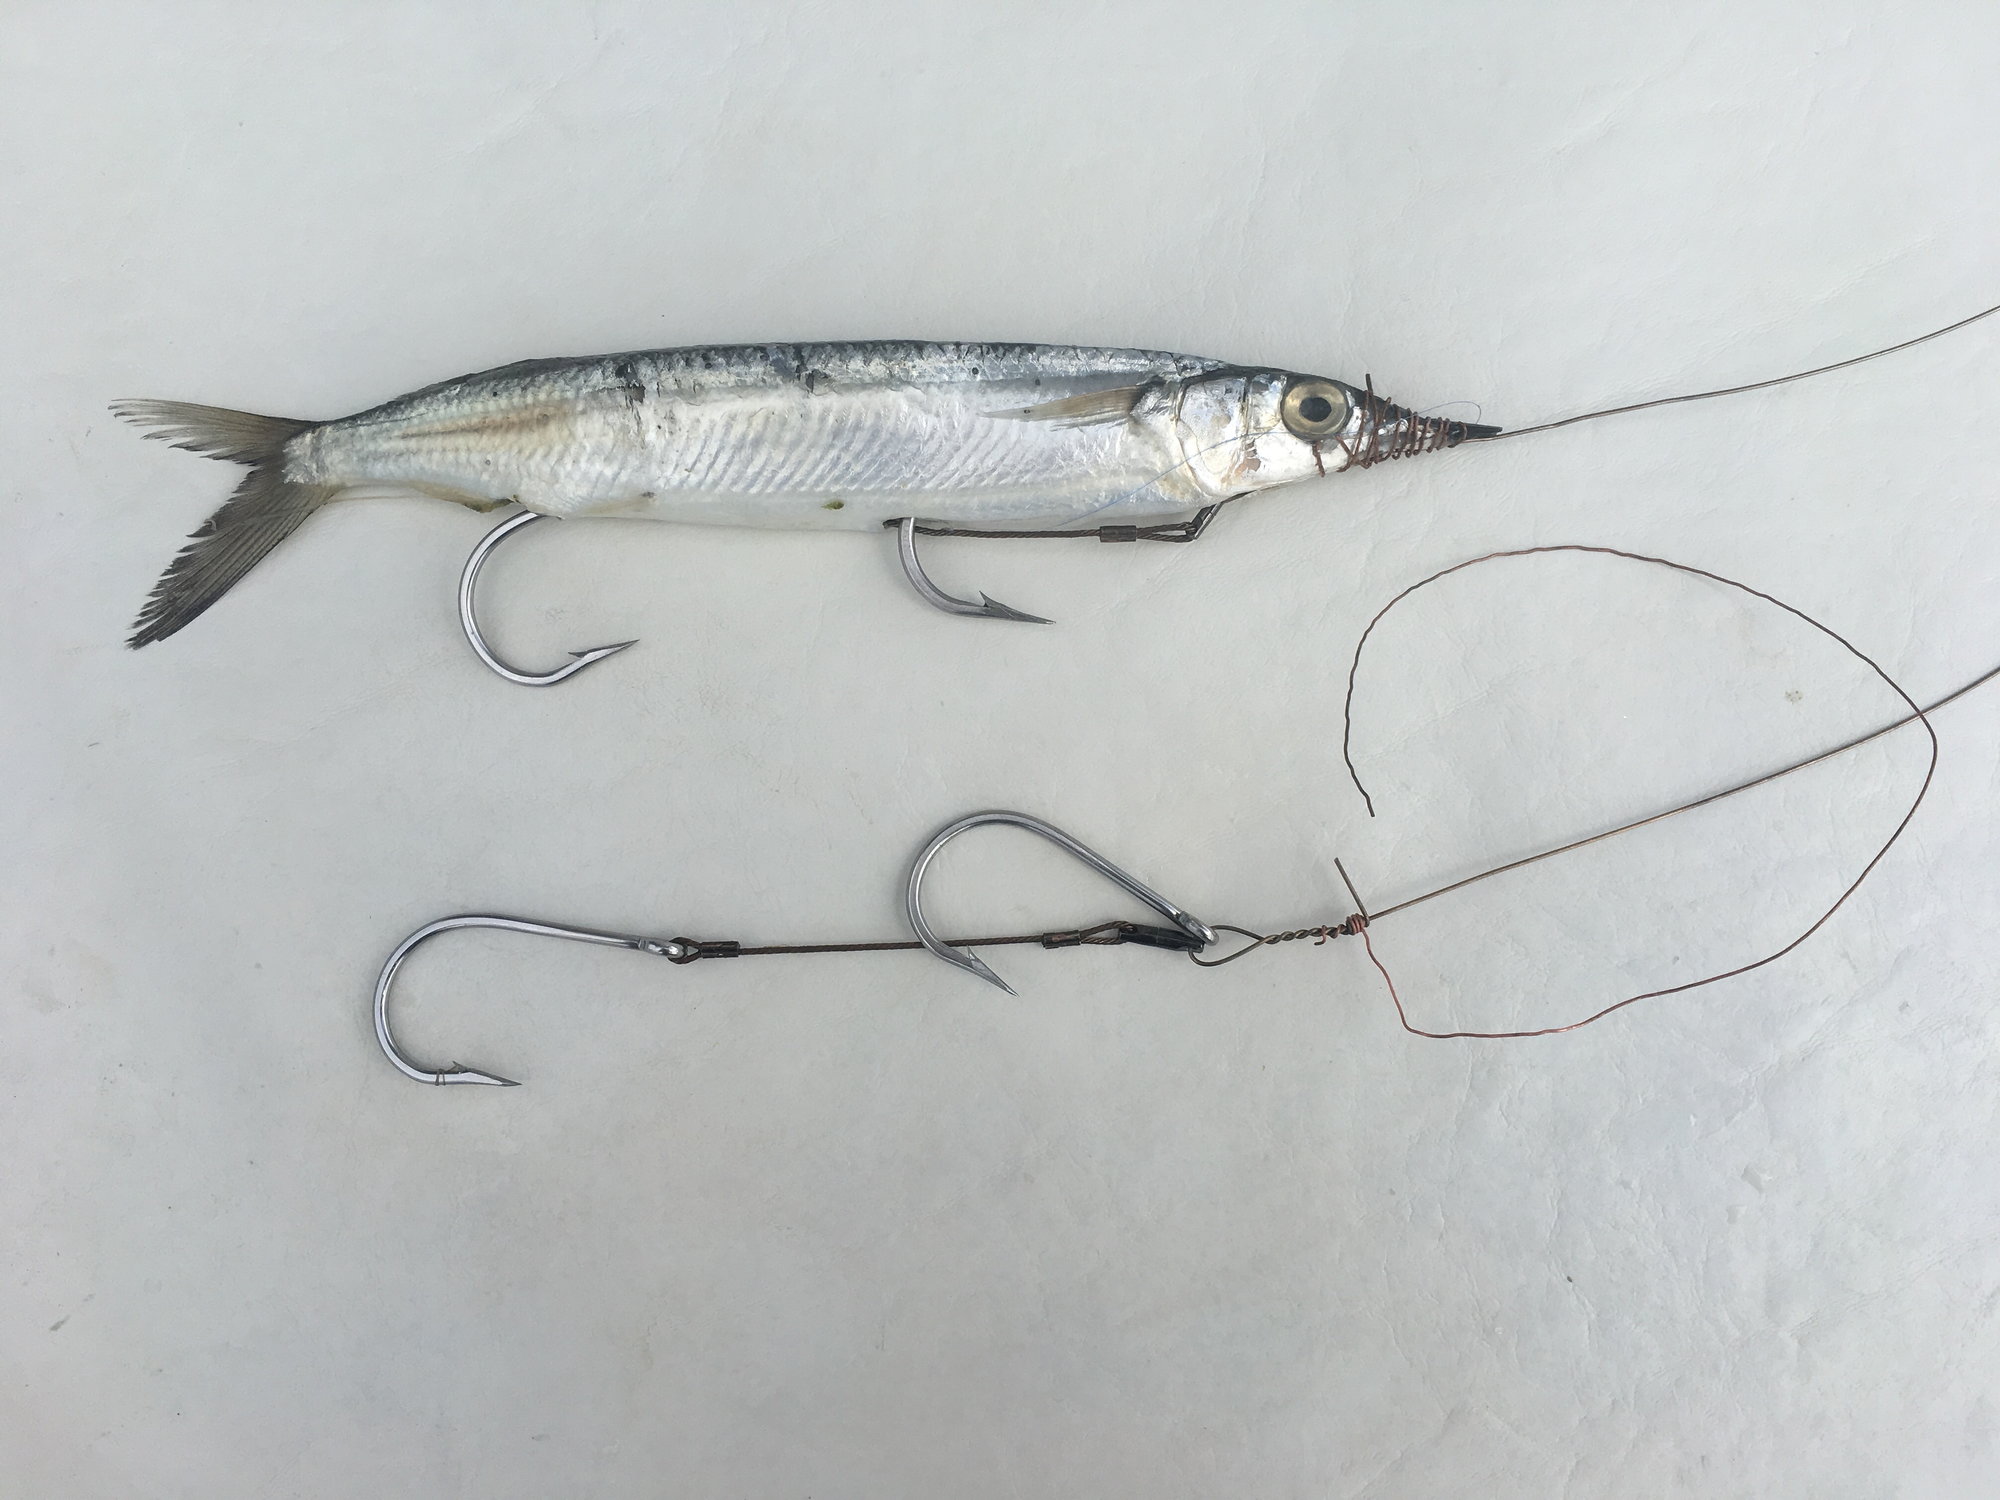 Double hook Ballyhoo? - The Hull Truth - Boating and Fishing Forum